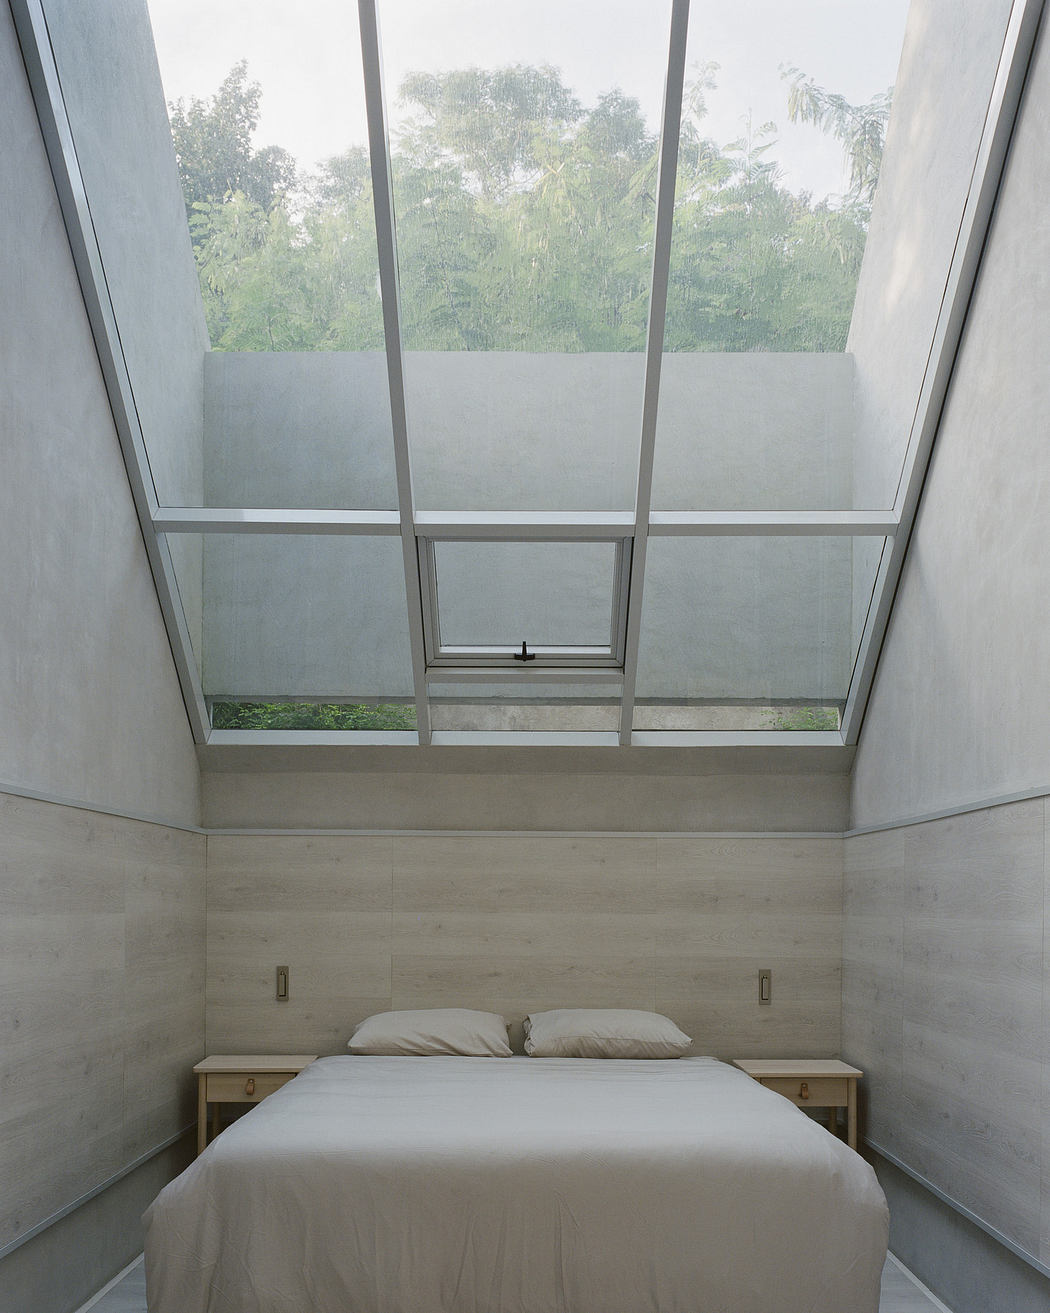 Minimalist bedroom with large skylight and concrete walls.